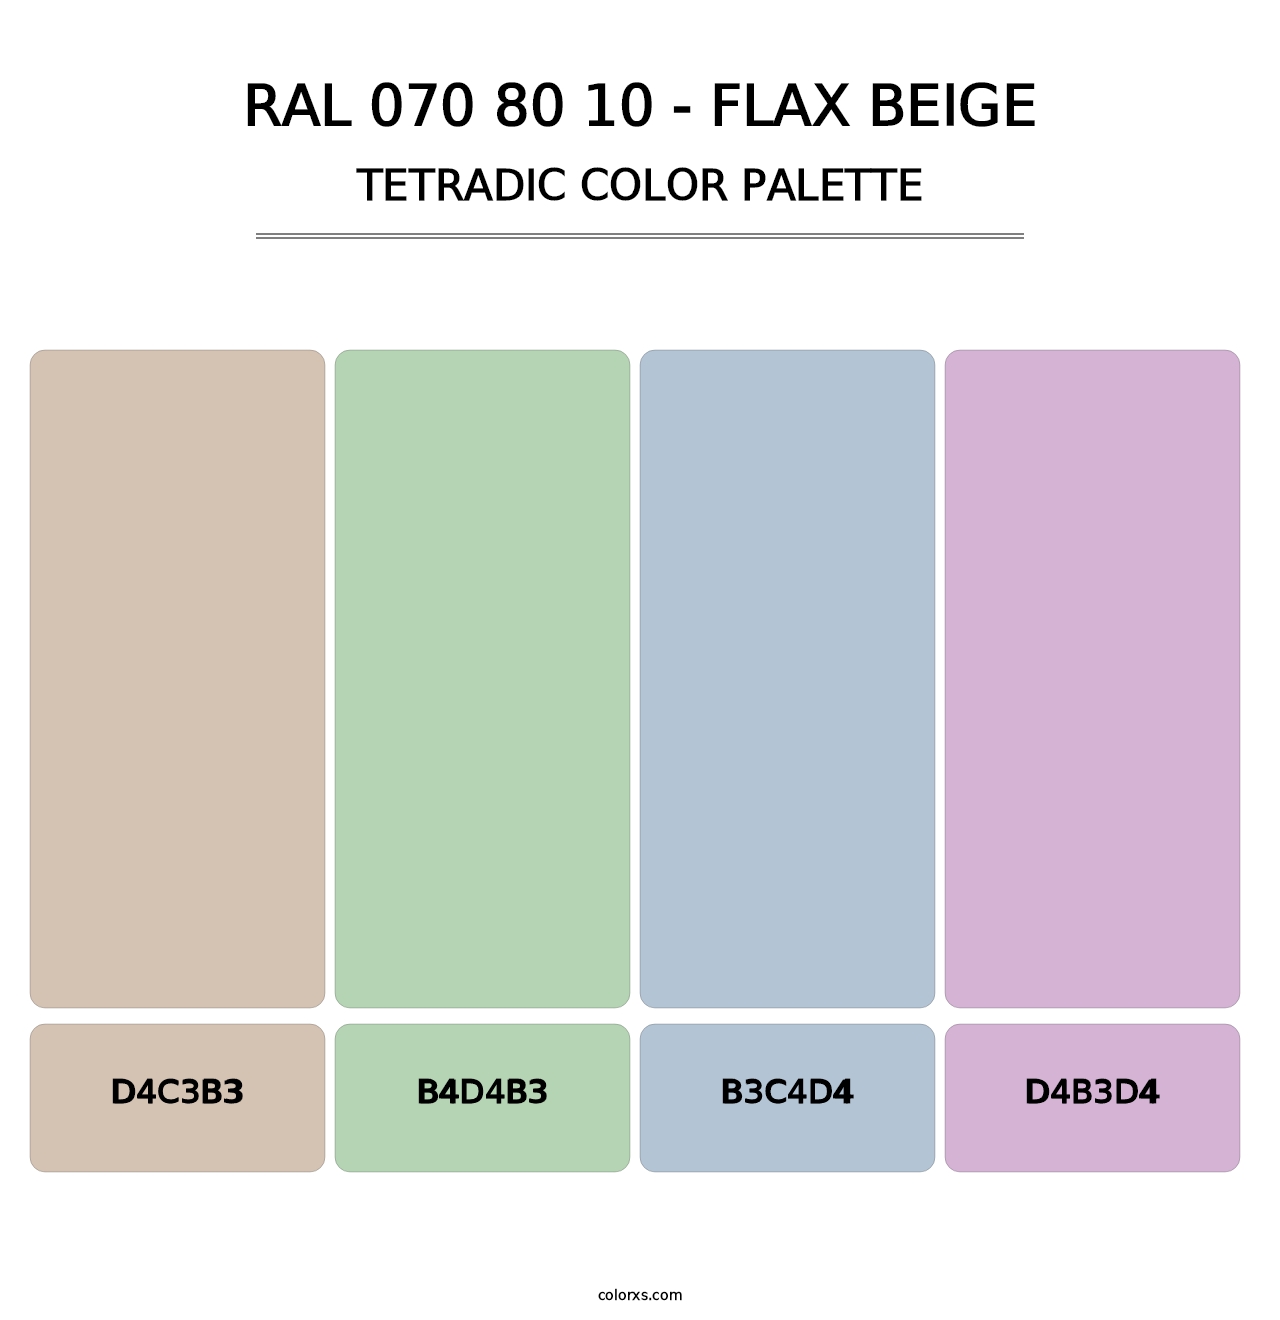 RAL 070 80 10 - Flax Beige - Tetradic Color Palette